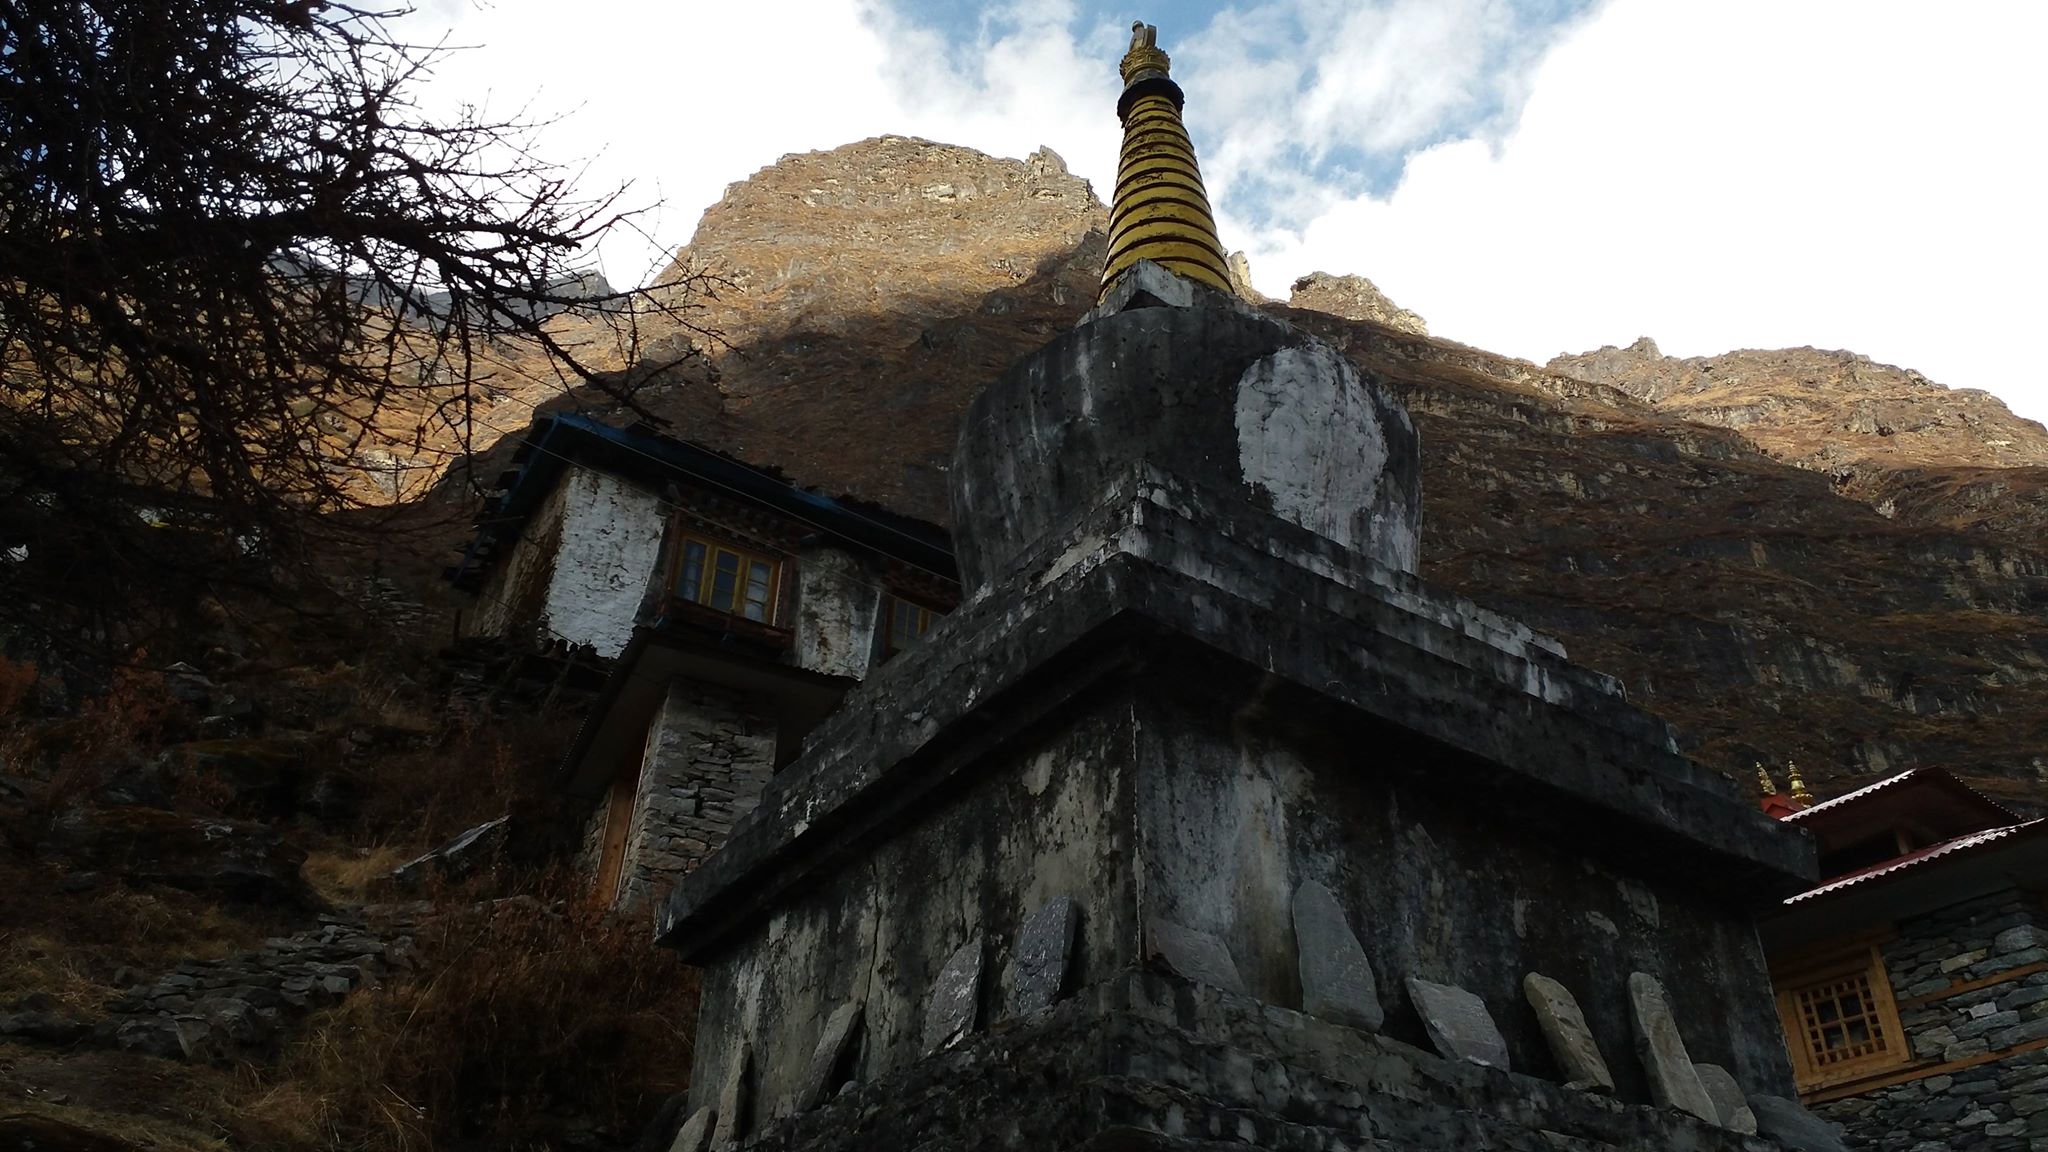 Stupa in Beding Village in the Rolwaling Valley